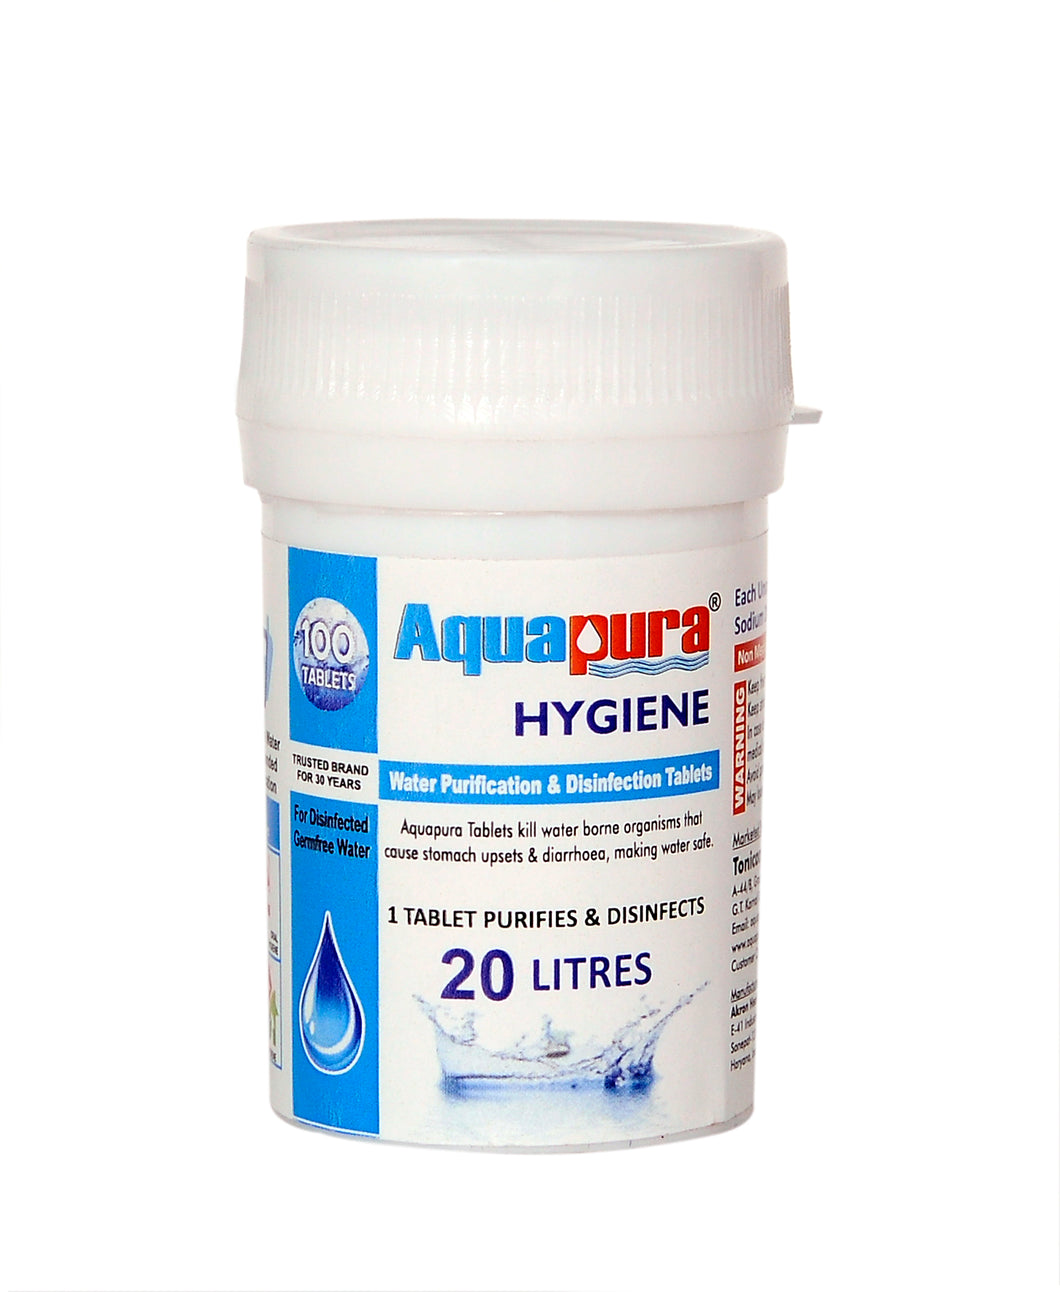 Aquapura Hygiene 20 - Water Purification Tablets for Drinking & Hygiene at Home/Workplace - Each Tablet for 20 Litres Water